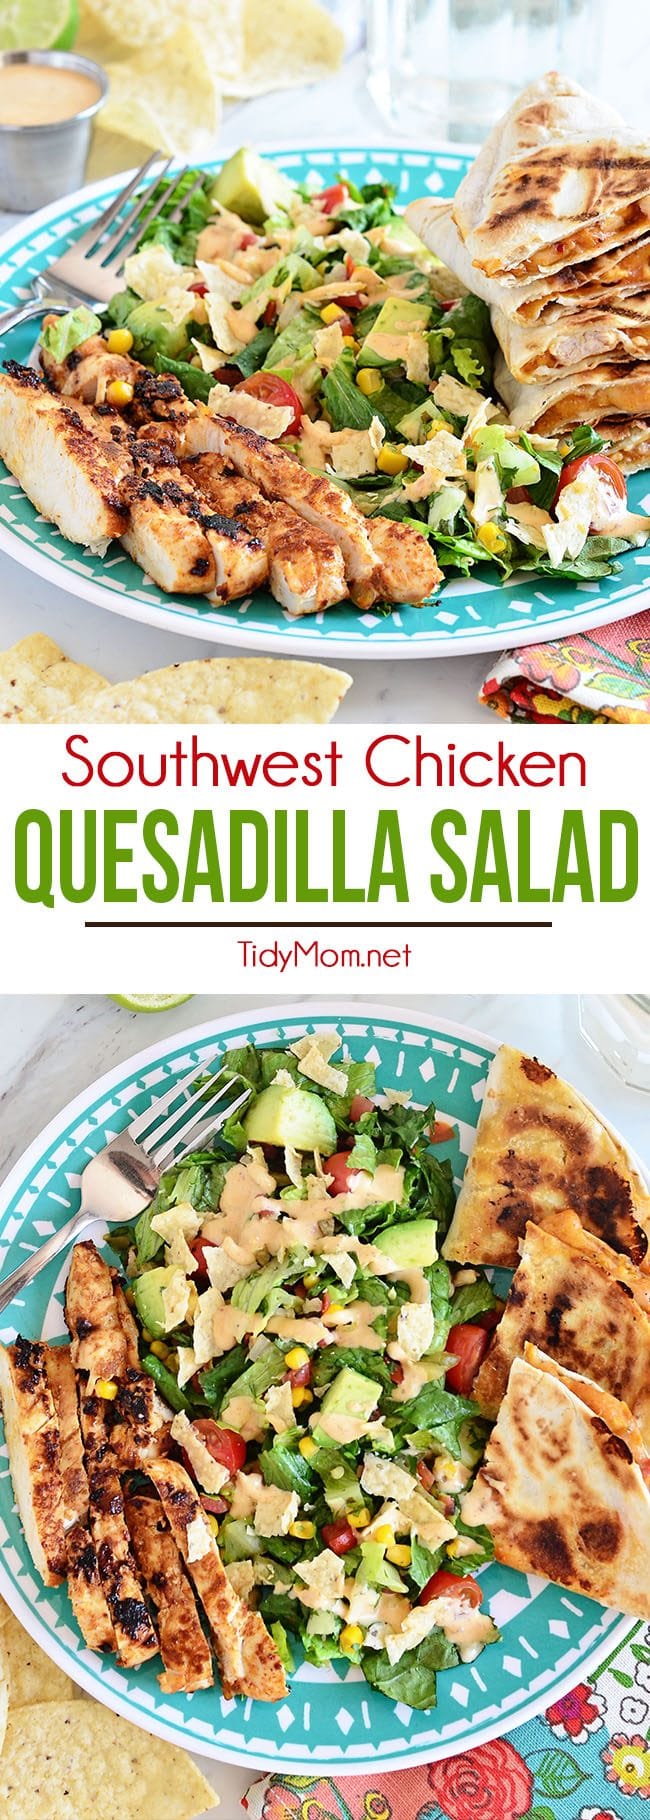 Southwest Chicken Quesadilla Salad is like an explosion in your mouth. Super easy to throw together.